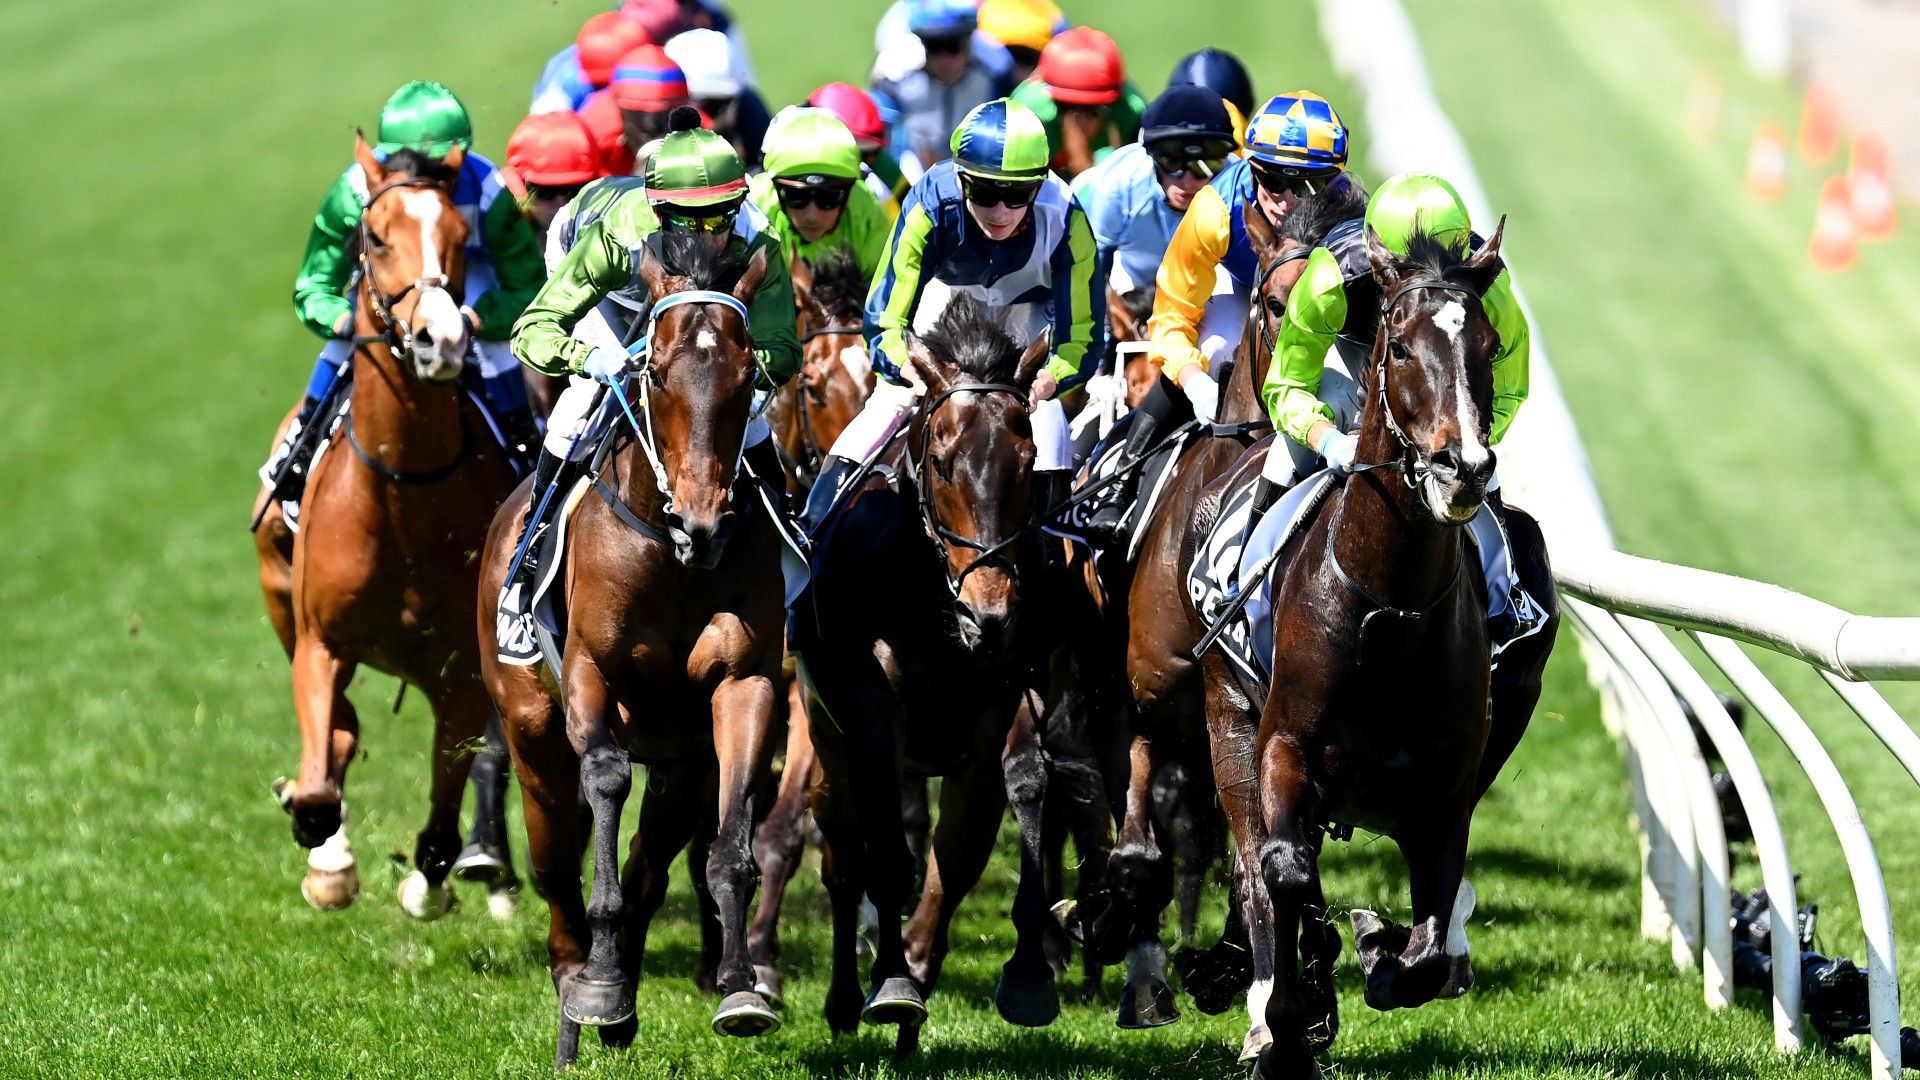 Melbourne Cup 2021: Full finishing order